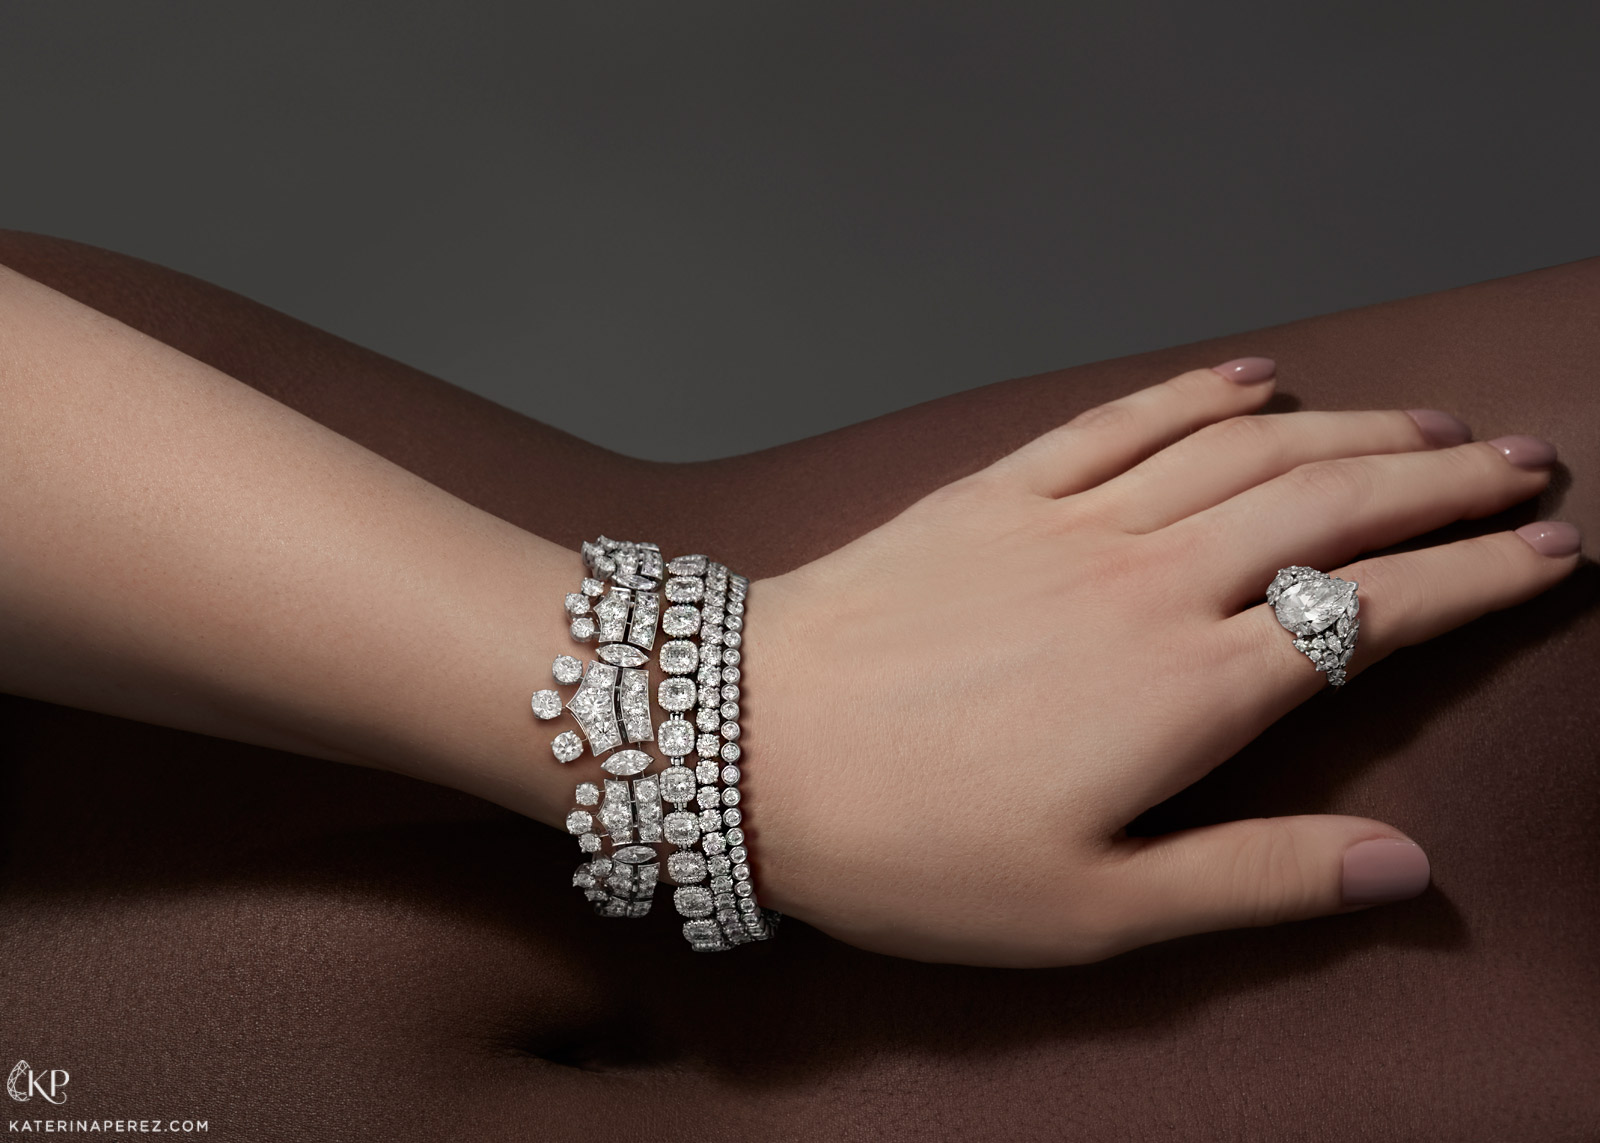 From left to right: De Beers 'Phenomena', 'Aura' and 'Classic Lines' bracelets with diamonds and 'London' ring from the 'Thames Path' collection with pear cut feature diamond and accenting diamonds